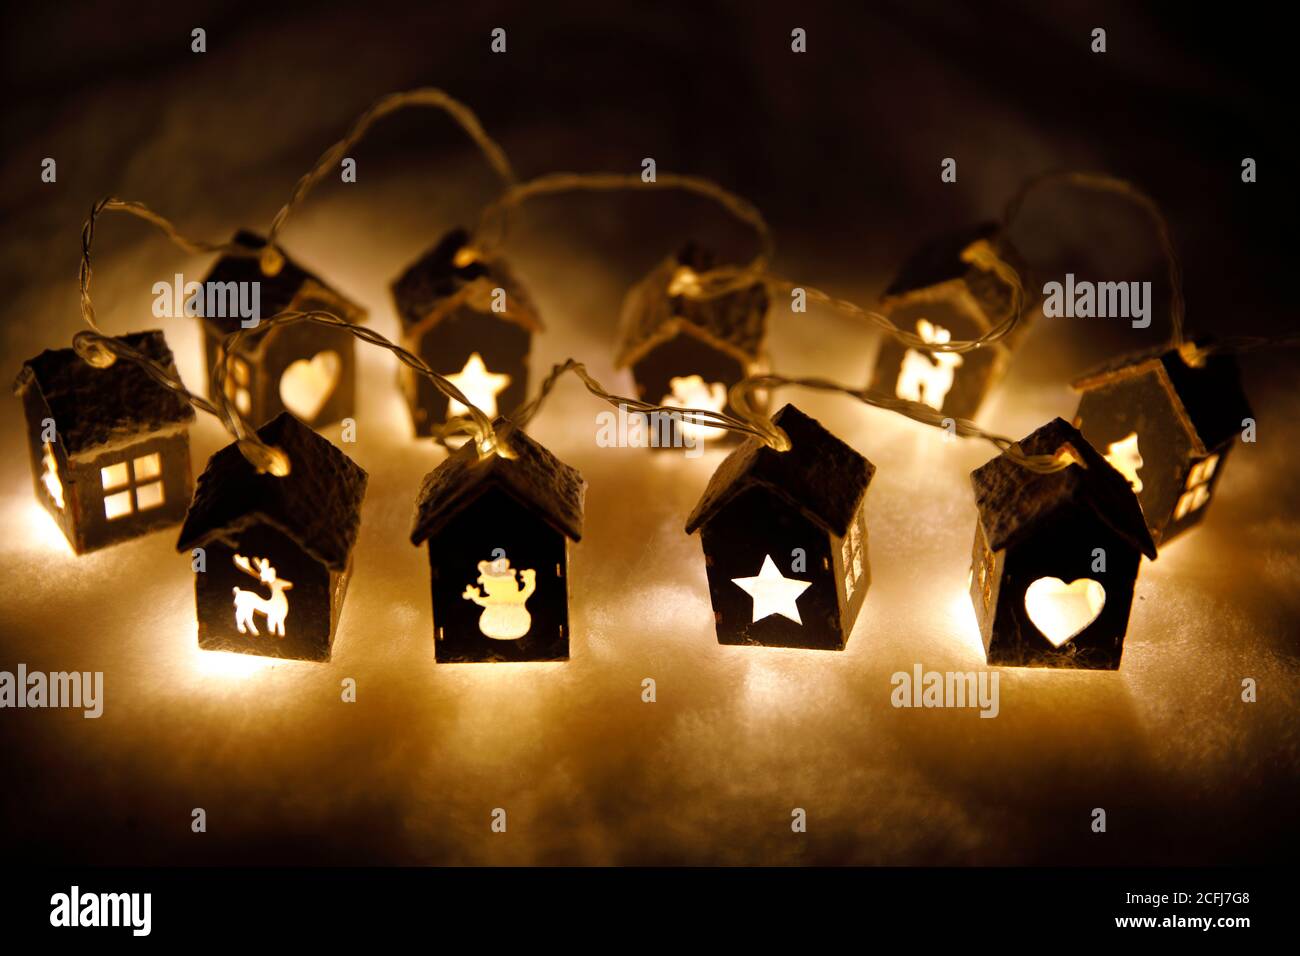 Lightened little houses with Christmas time motifs Stock Photo